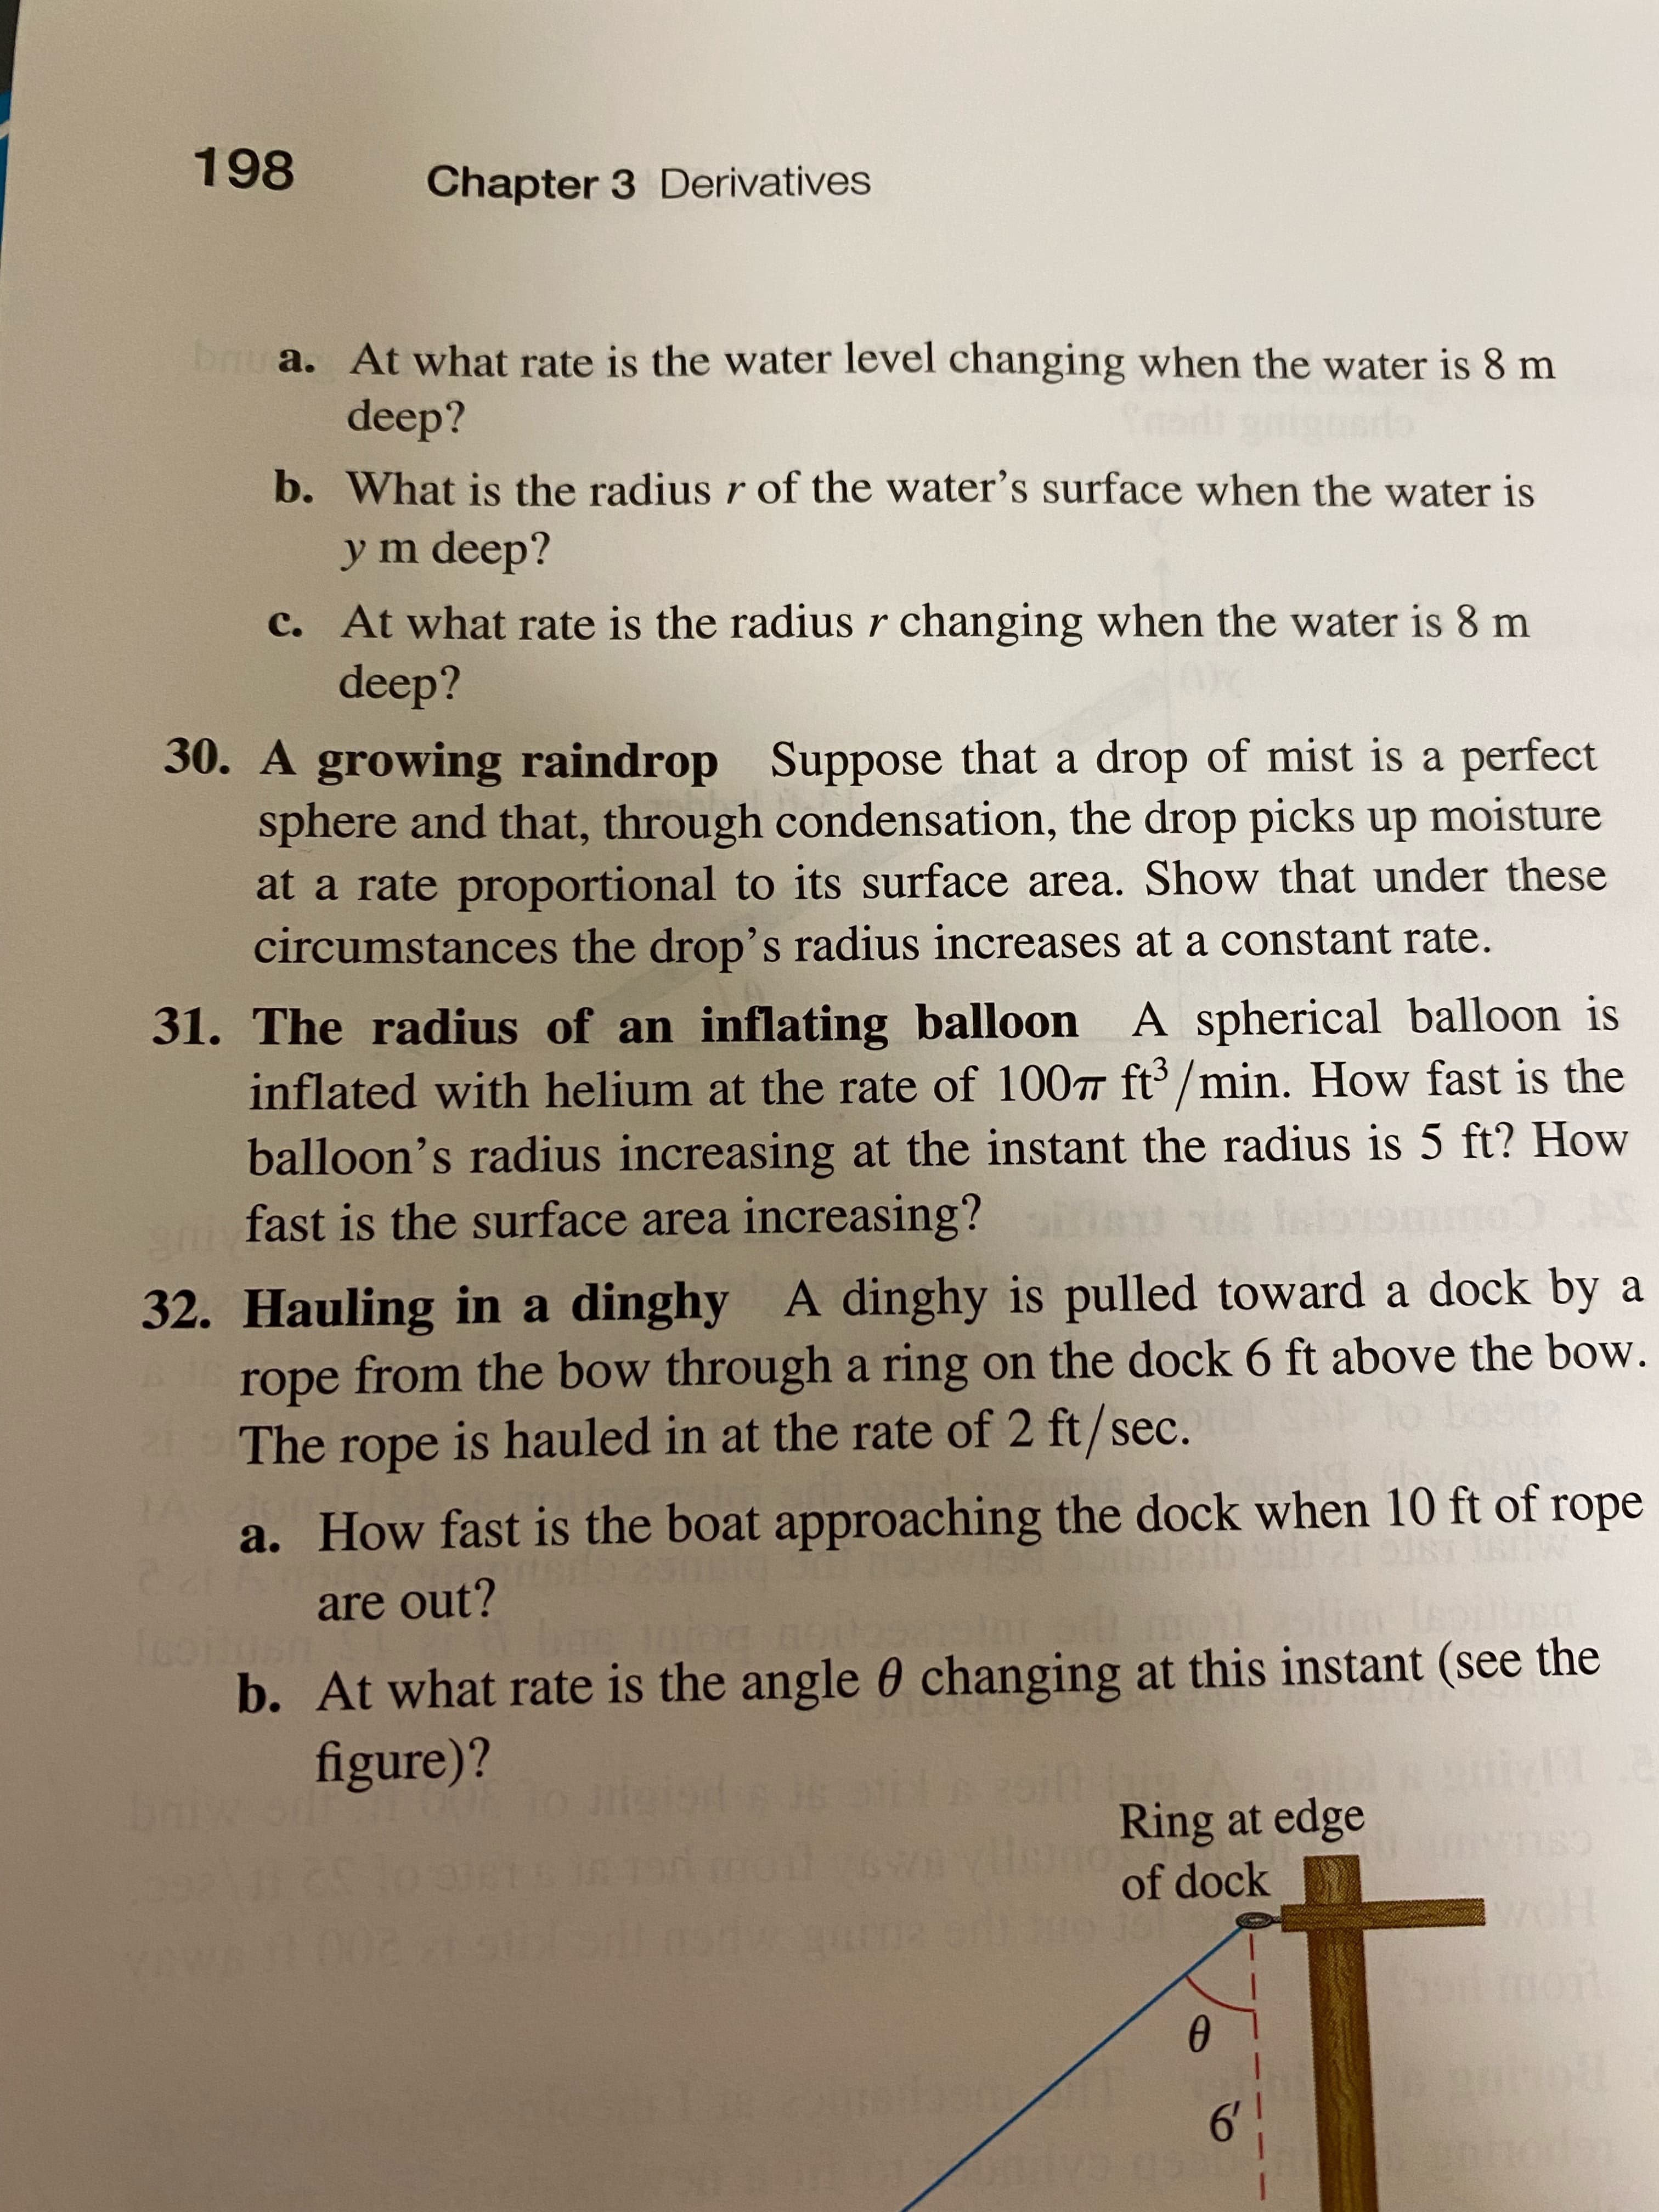 198
Chapter 3 Derivatives
bru a. At what rate is the water level changing when the water is 8 m
deep?
b. What is the radius r of the water's surface when the water is
ym deep?
c. At what rate is the radius r changing when the water is 8 m
deep?
30. A growing raindrop Suppose that a drop of mist is a perfect
sphere and that, through condensation, the drop picks up moisture
at a rate proportional to its surface area. Show that under these
circumstances the drop's radius increases at a constant rate.
31. The radius of an inflating balloon A spherical balloon is
inflated with helium at the rate of 100T ft'/min. How fast is the
balloon's radius increasing at the instant the radius is 5 ft? How
sfast is the surface area increasing?
Co
32. Hauling in a dinghy A dinghy is pulled toward a dock by a
rope from the bow through a ring on the dock 6 ft above the bow.
The rope is hauled in at the rate of 2 ft/sec.
adope
a. How fast is the boat approaching the dock when 10 ft of rope
are out?
b. At what rate is the angle 0 changing at this instant (see the
figure)?
Ring at edge
132
200
of dock
CSLI
6!
